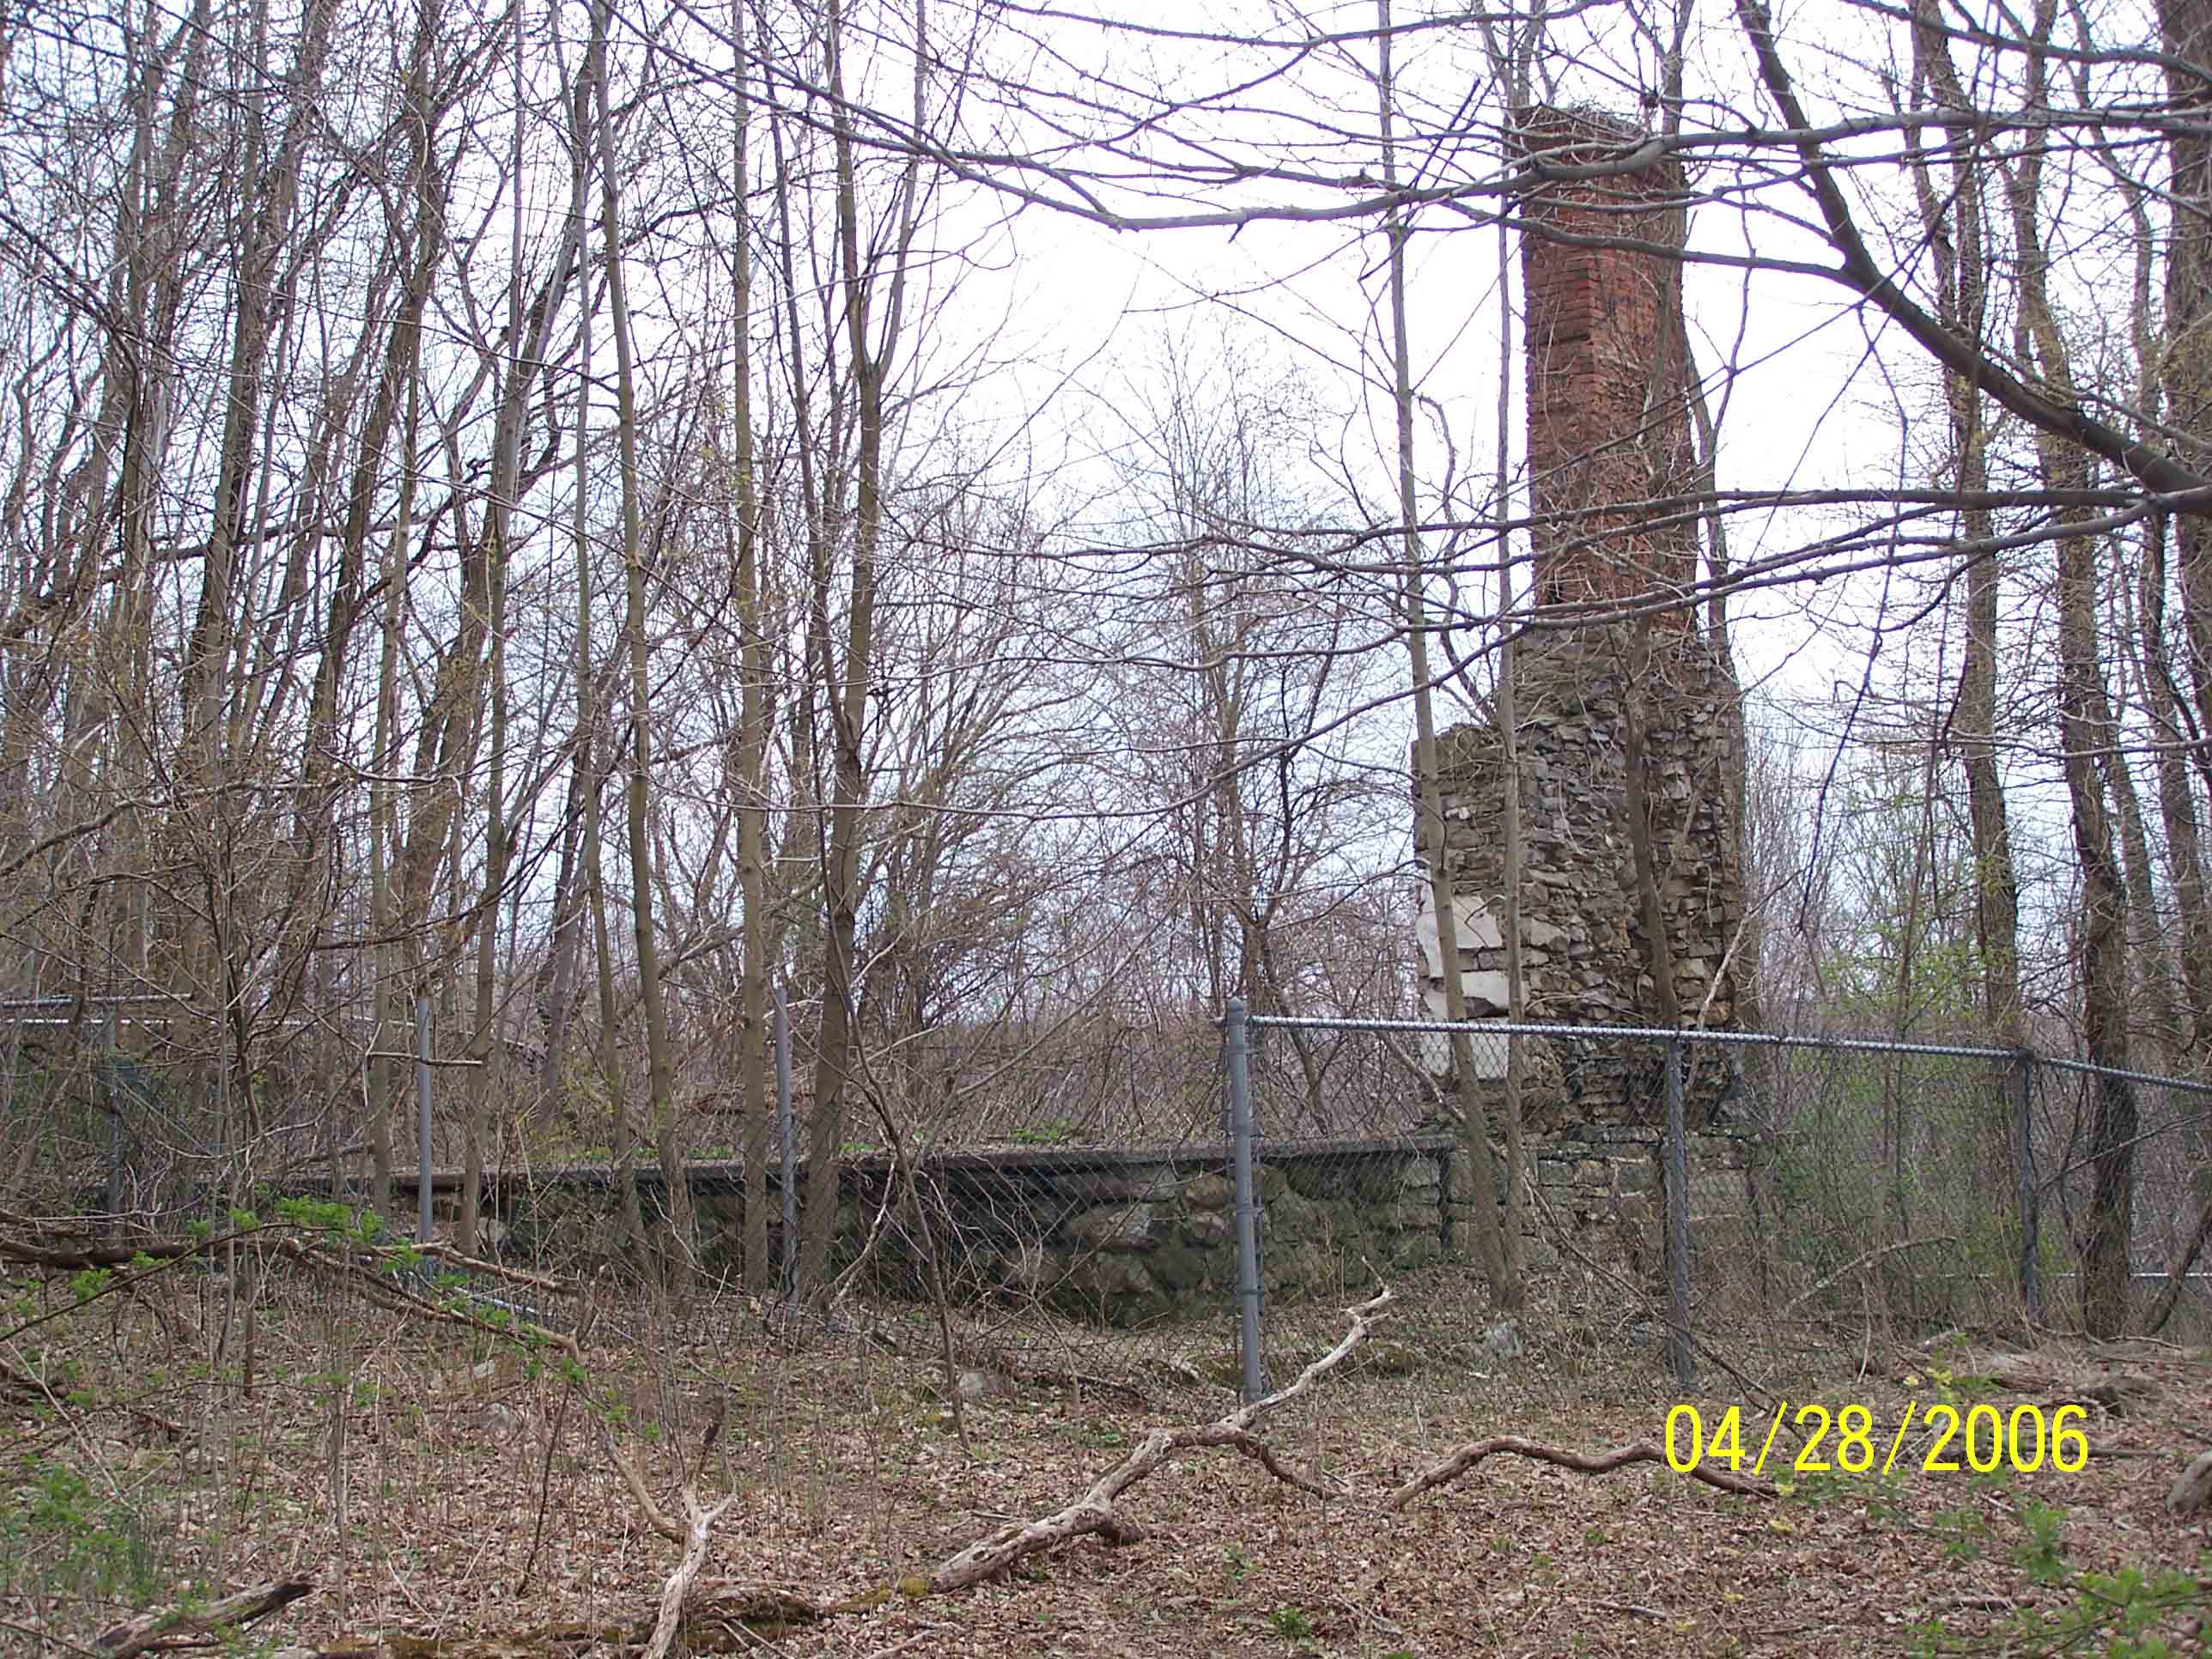 mm 4.8 - Stone foundations of Kazmar house, built around 1815 and demolished in 1991 - 4/28/07. Update (2012)  Because of a relcoation, this landmark on Iron Mountain Road is no longer on the AT but is north of the trail. Courtesy at@rohland.org